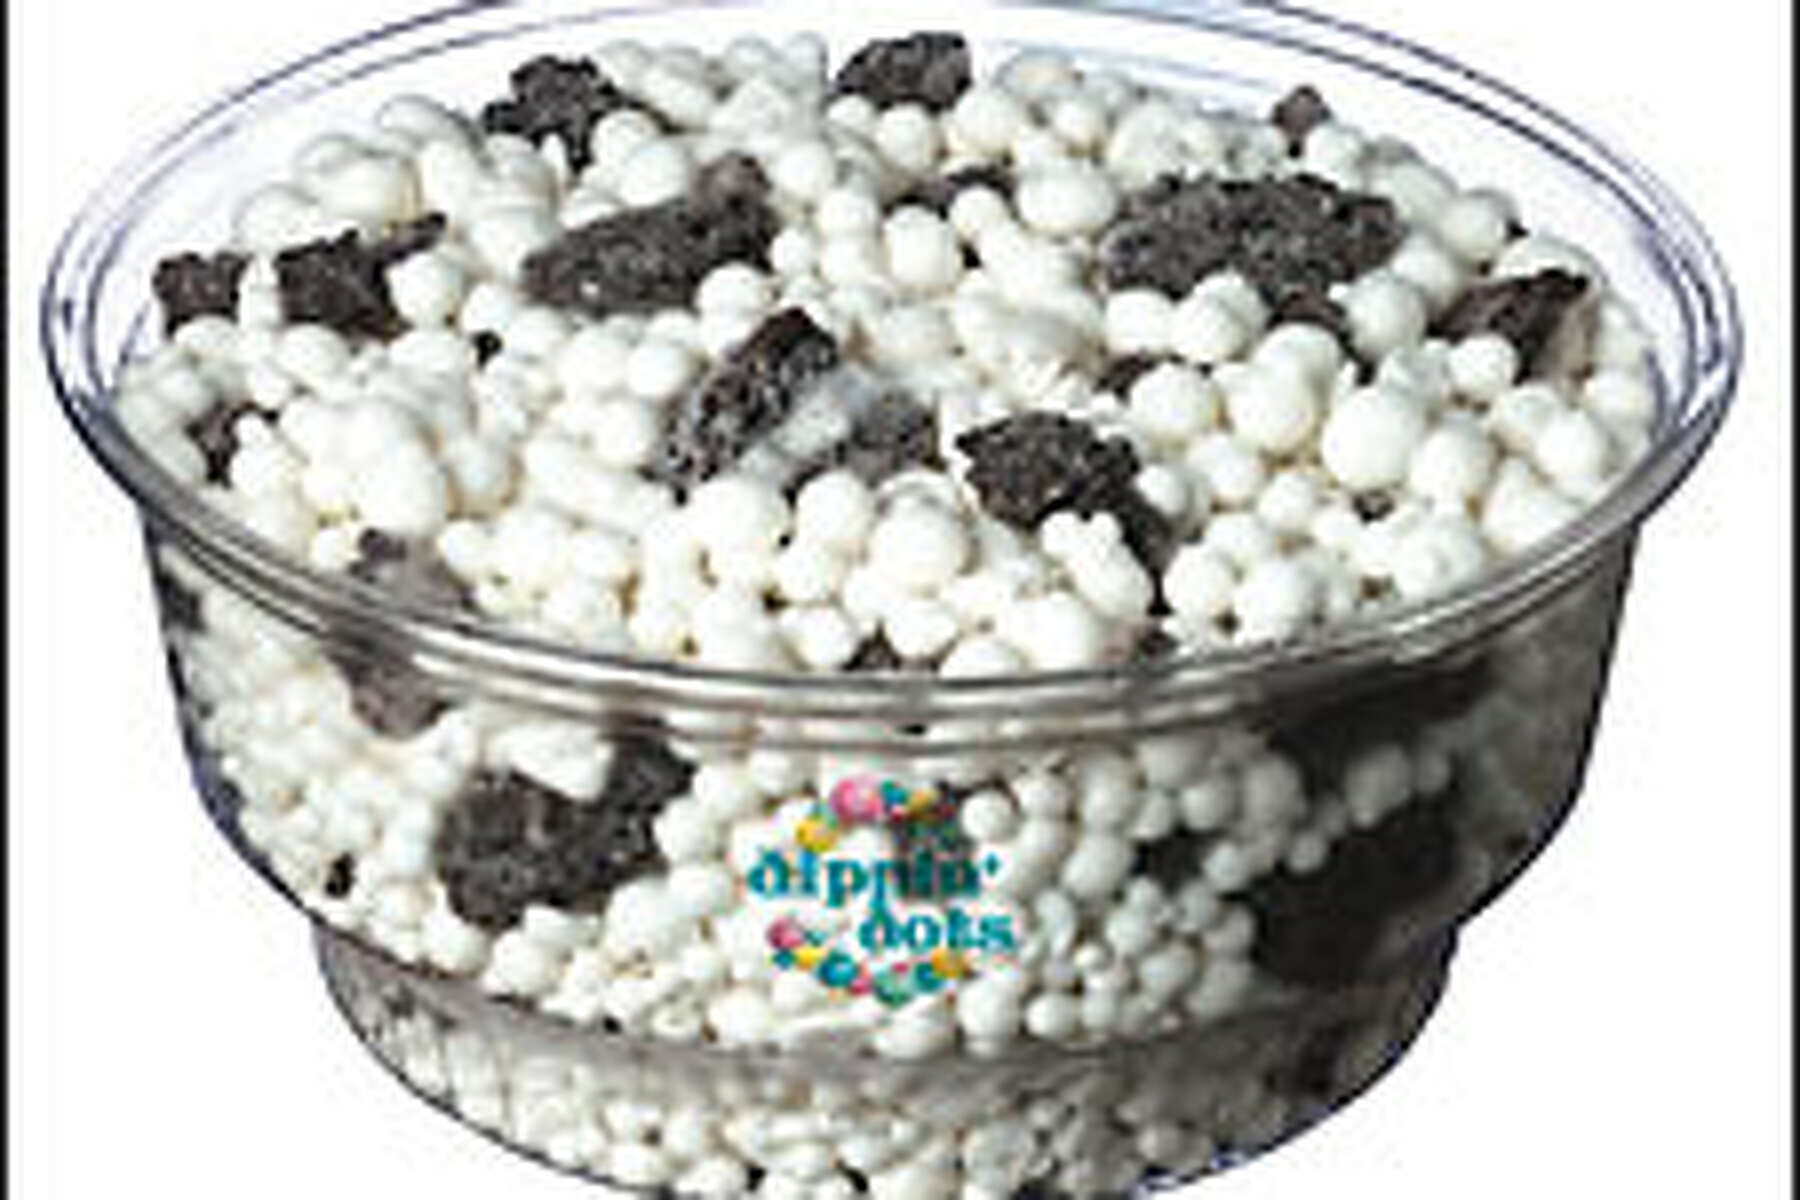 On Dining: Trippin' on Dippin' Dots under the arches